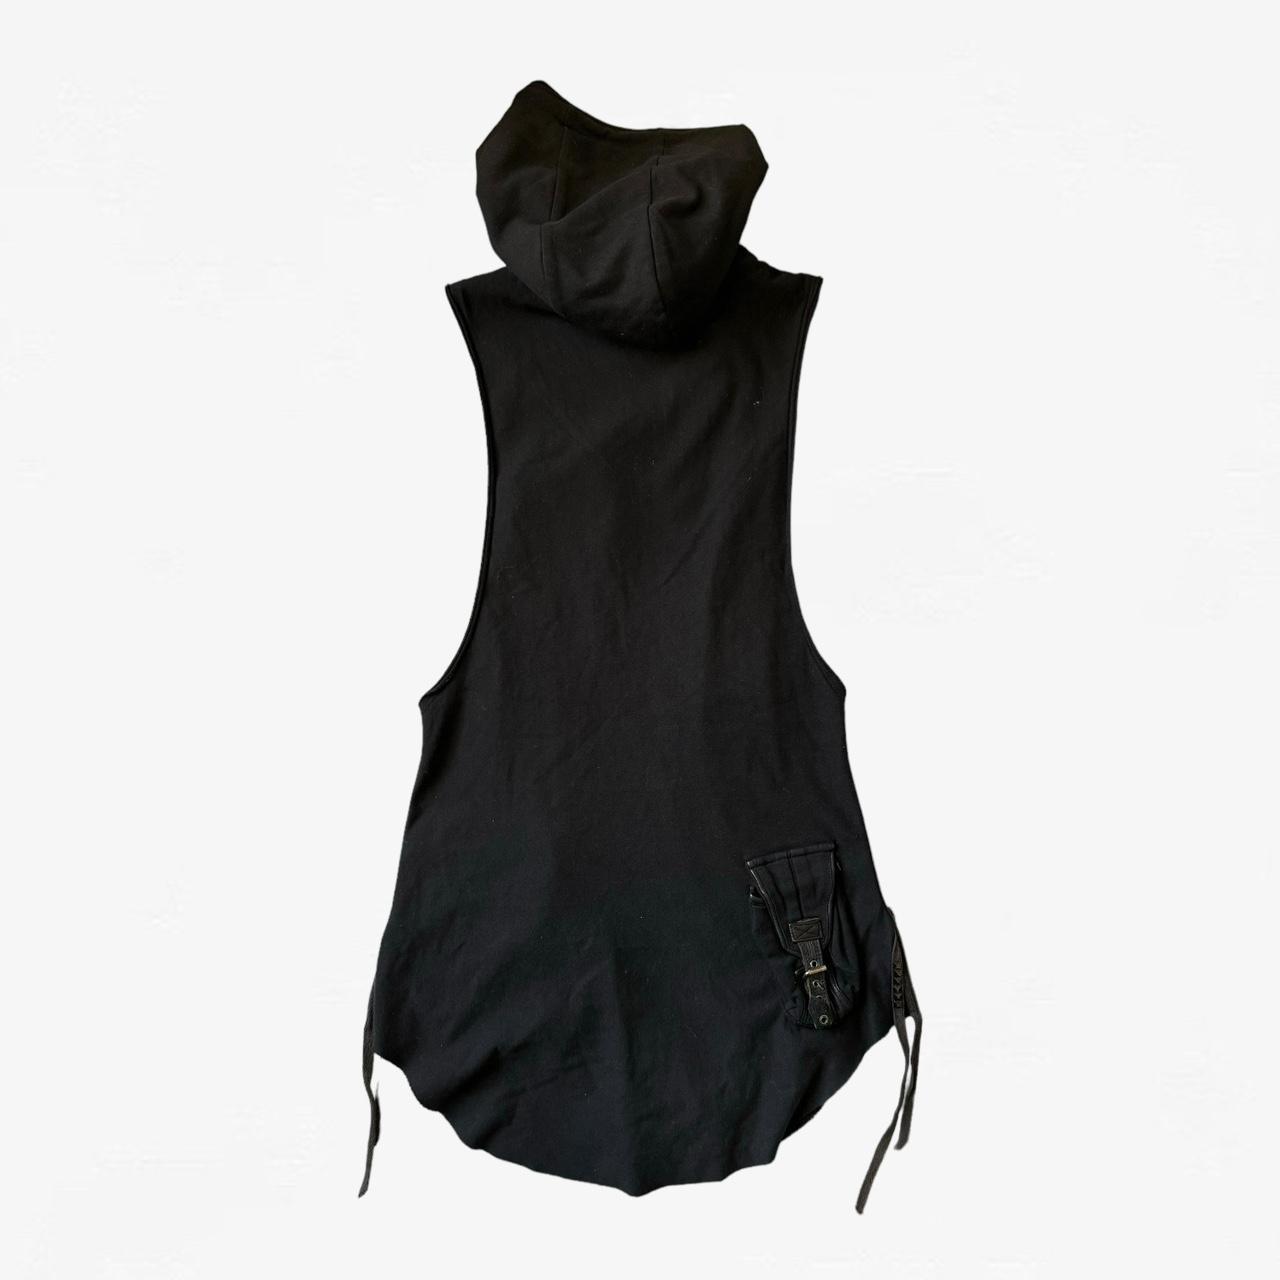 Japanese brand Kmrii archive zip-up vest. Has